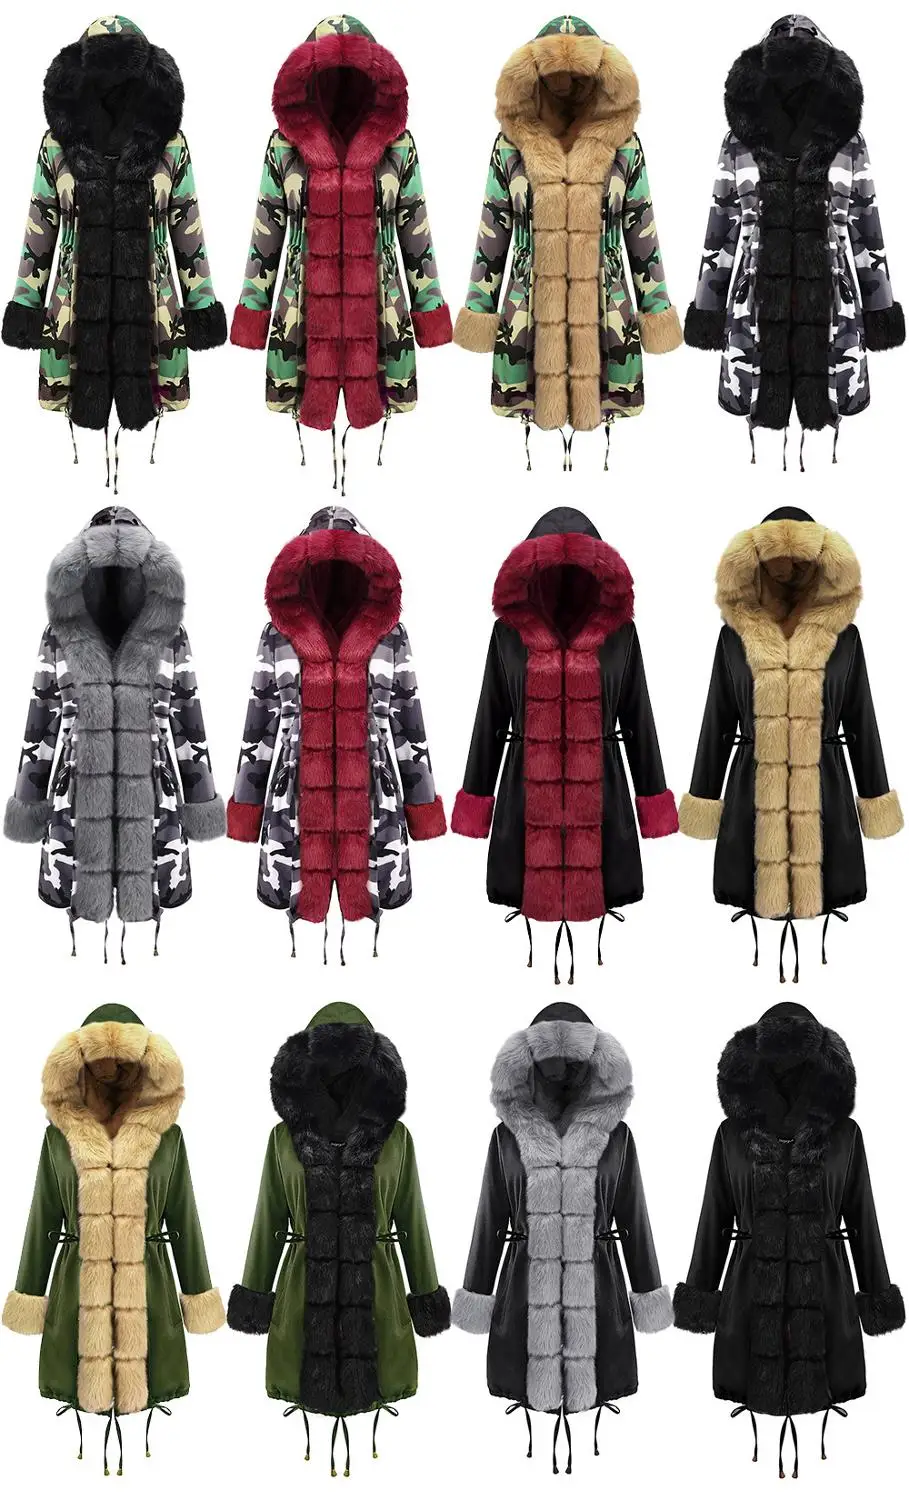 

fur jacket Women's Camouflage Parka Jacket thick Warm Long Hooded Coat Solid color Winter Plush fur Collars overcoat 2021